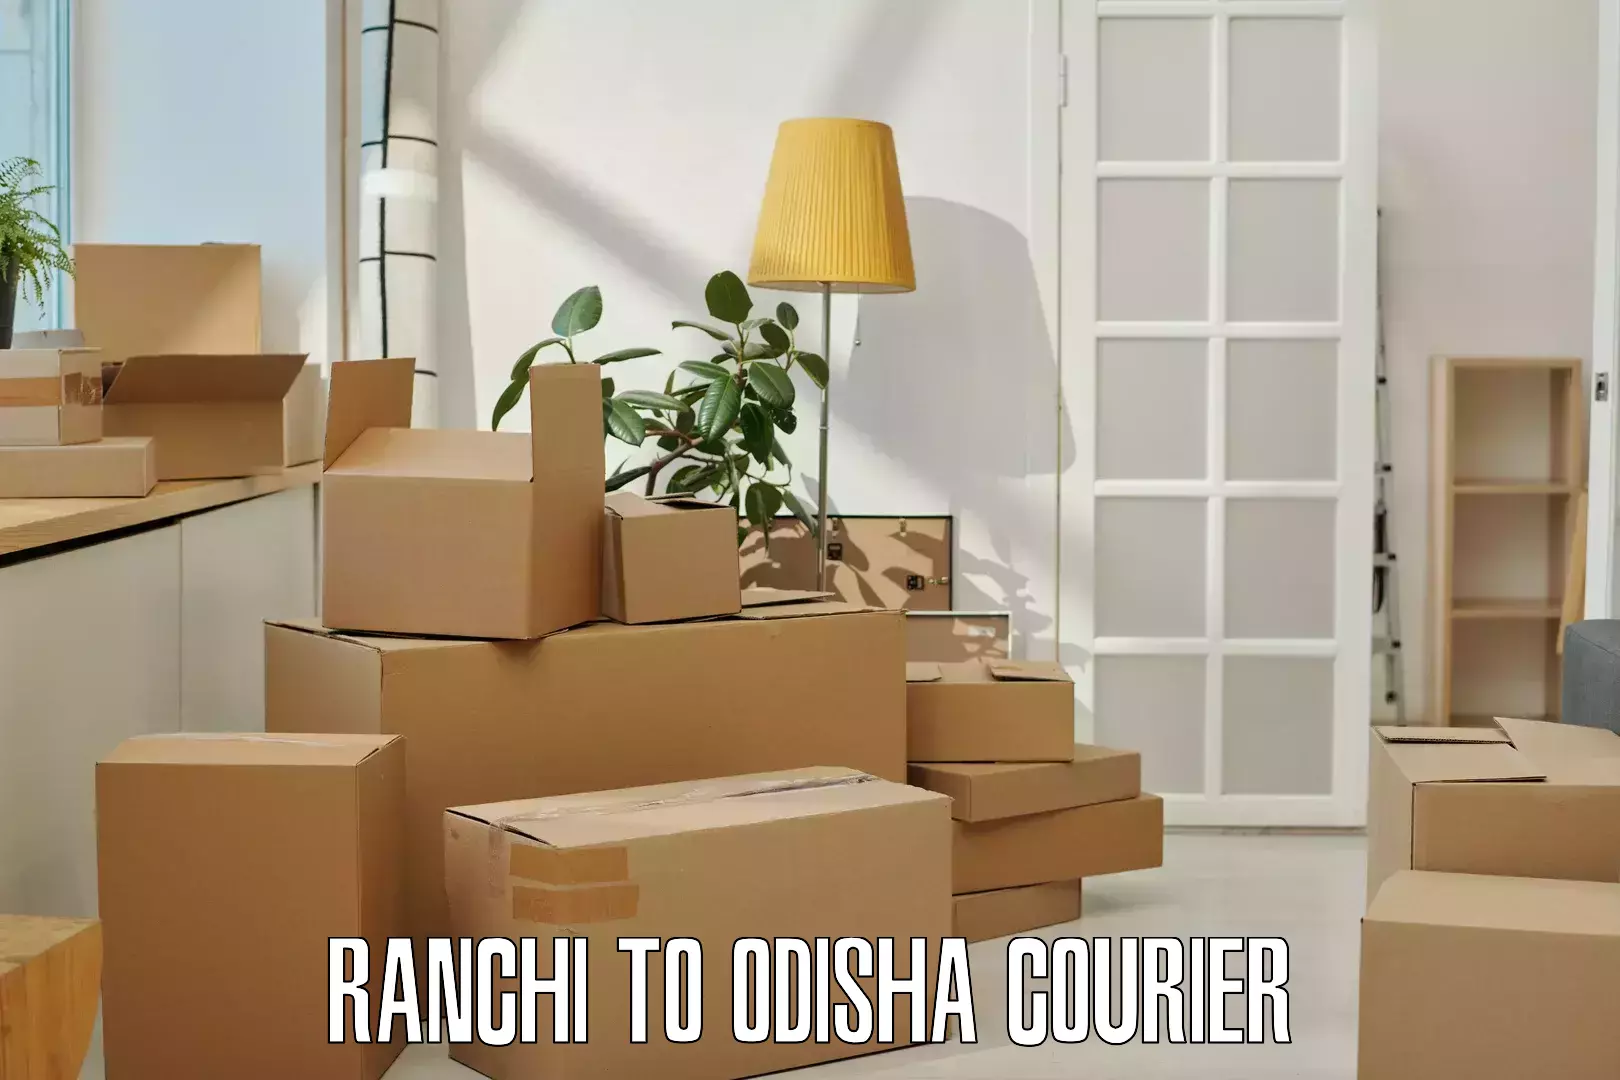 Next day courier Ranchi to Jharsuguda